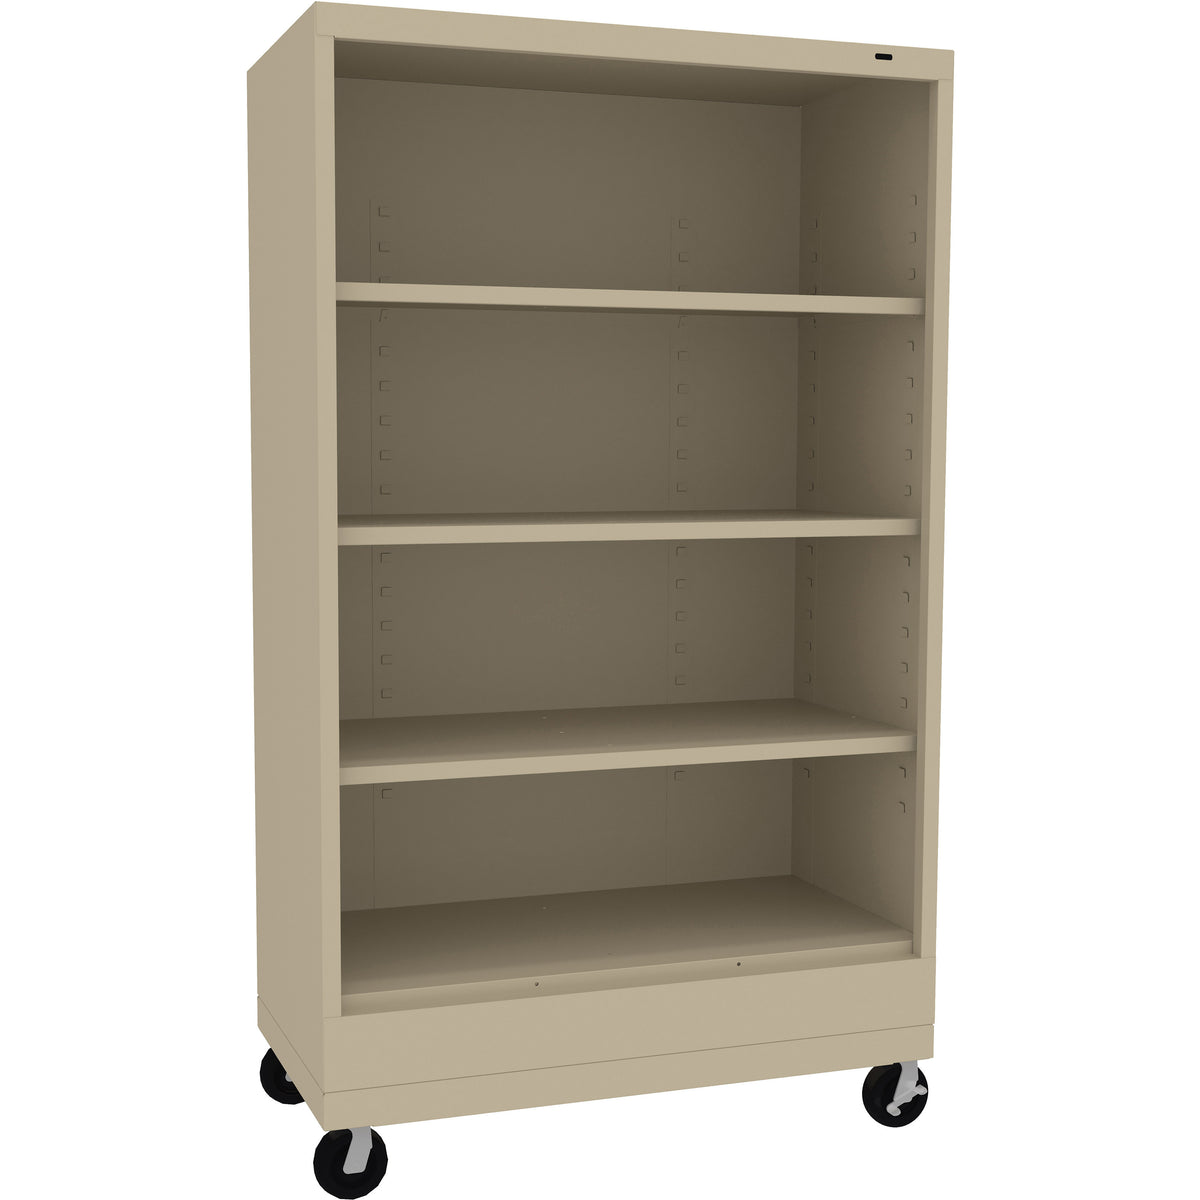 Tennsco 55" High Welded Bookcase with Casters - 18" Deep, BC18-52M